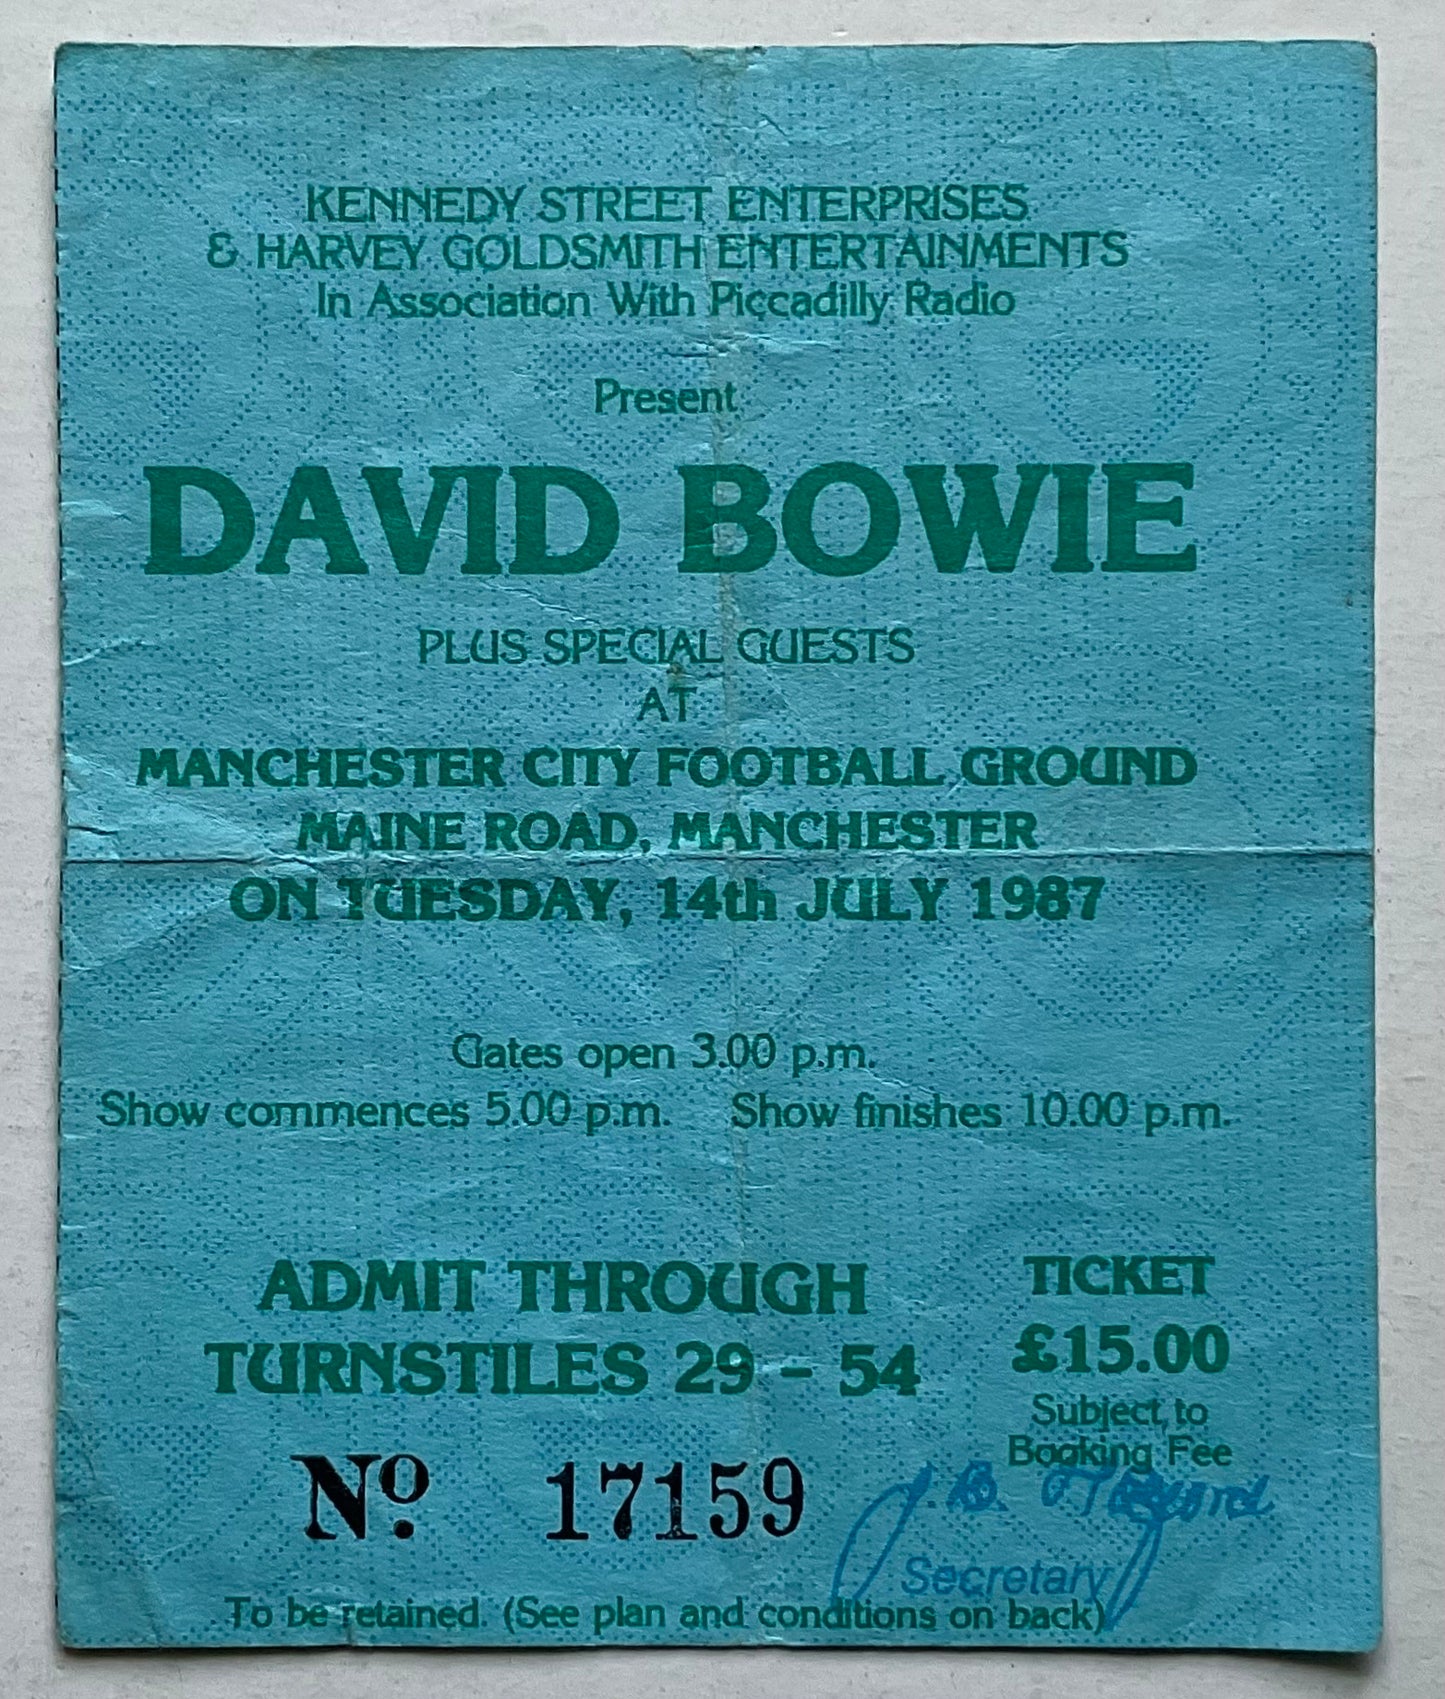 David Bowie Original Used Concert Ticket Manchester City Football Ground 14th July 1987